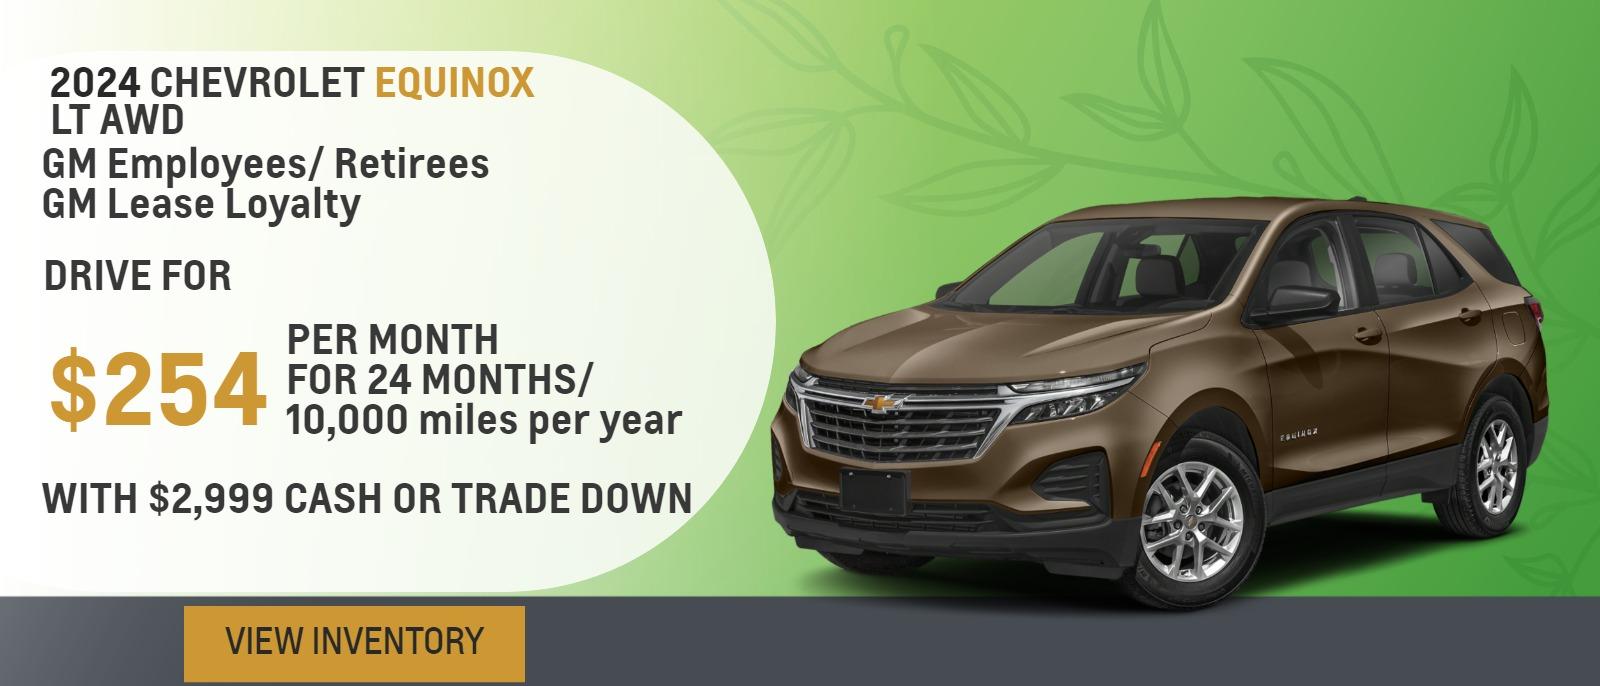 2024 Equinox LT AWD
GM Employees/ Retirees
GM Lease Loyalty

Drive for $254 per month
24 Months / 10,000 miles per year
With $2,999 cash or trade down